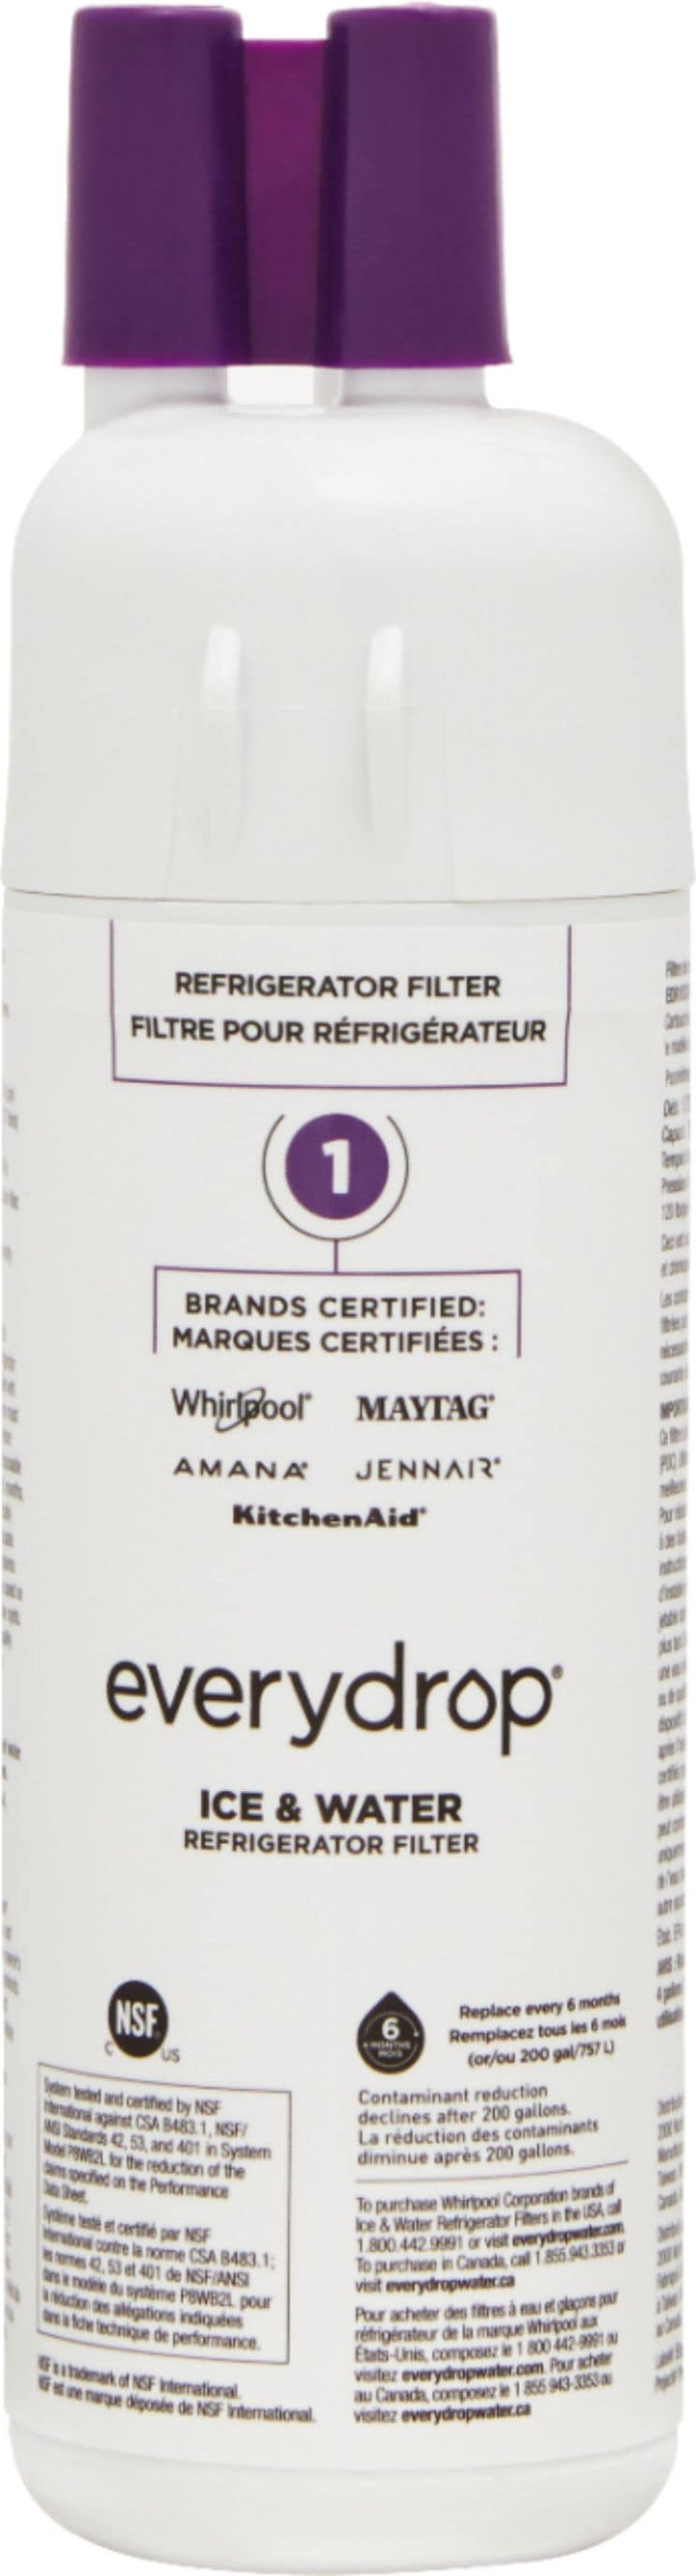 Whirlpool - EveryDrop 1 Ice and Water Filter - White_1